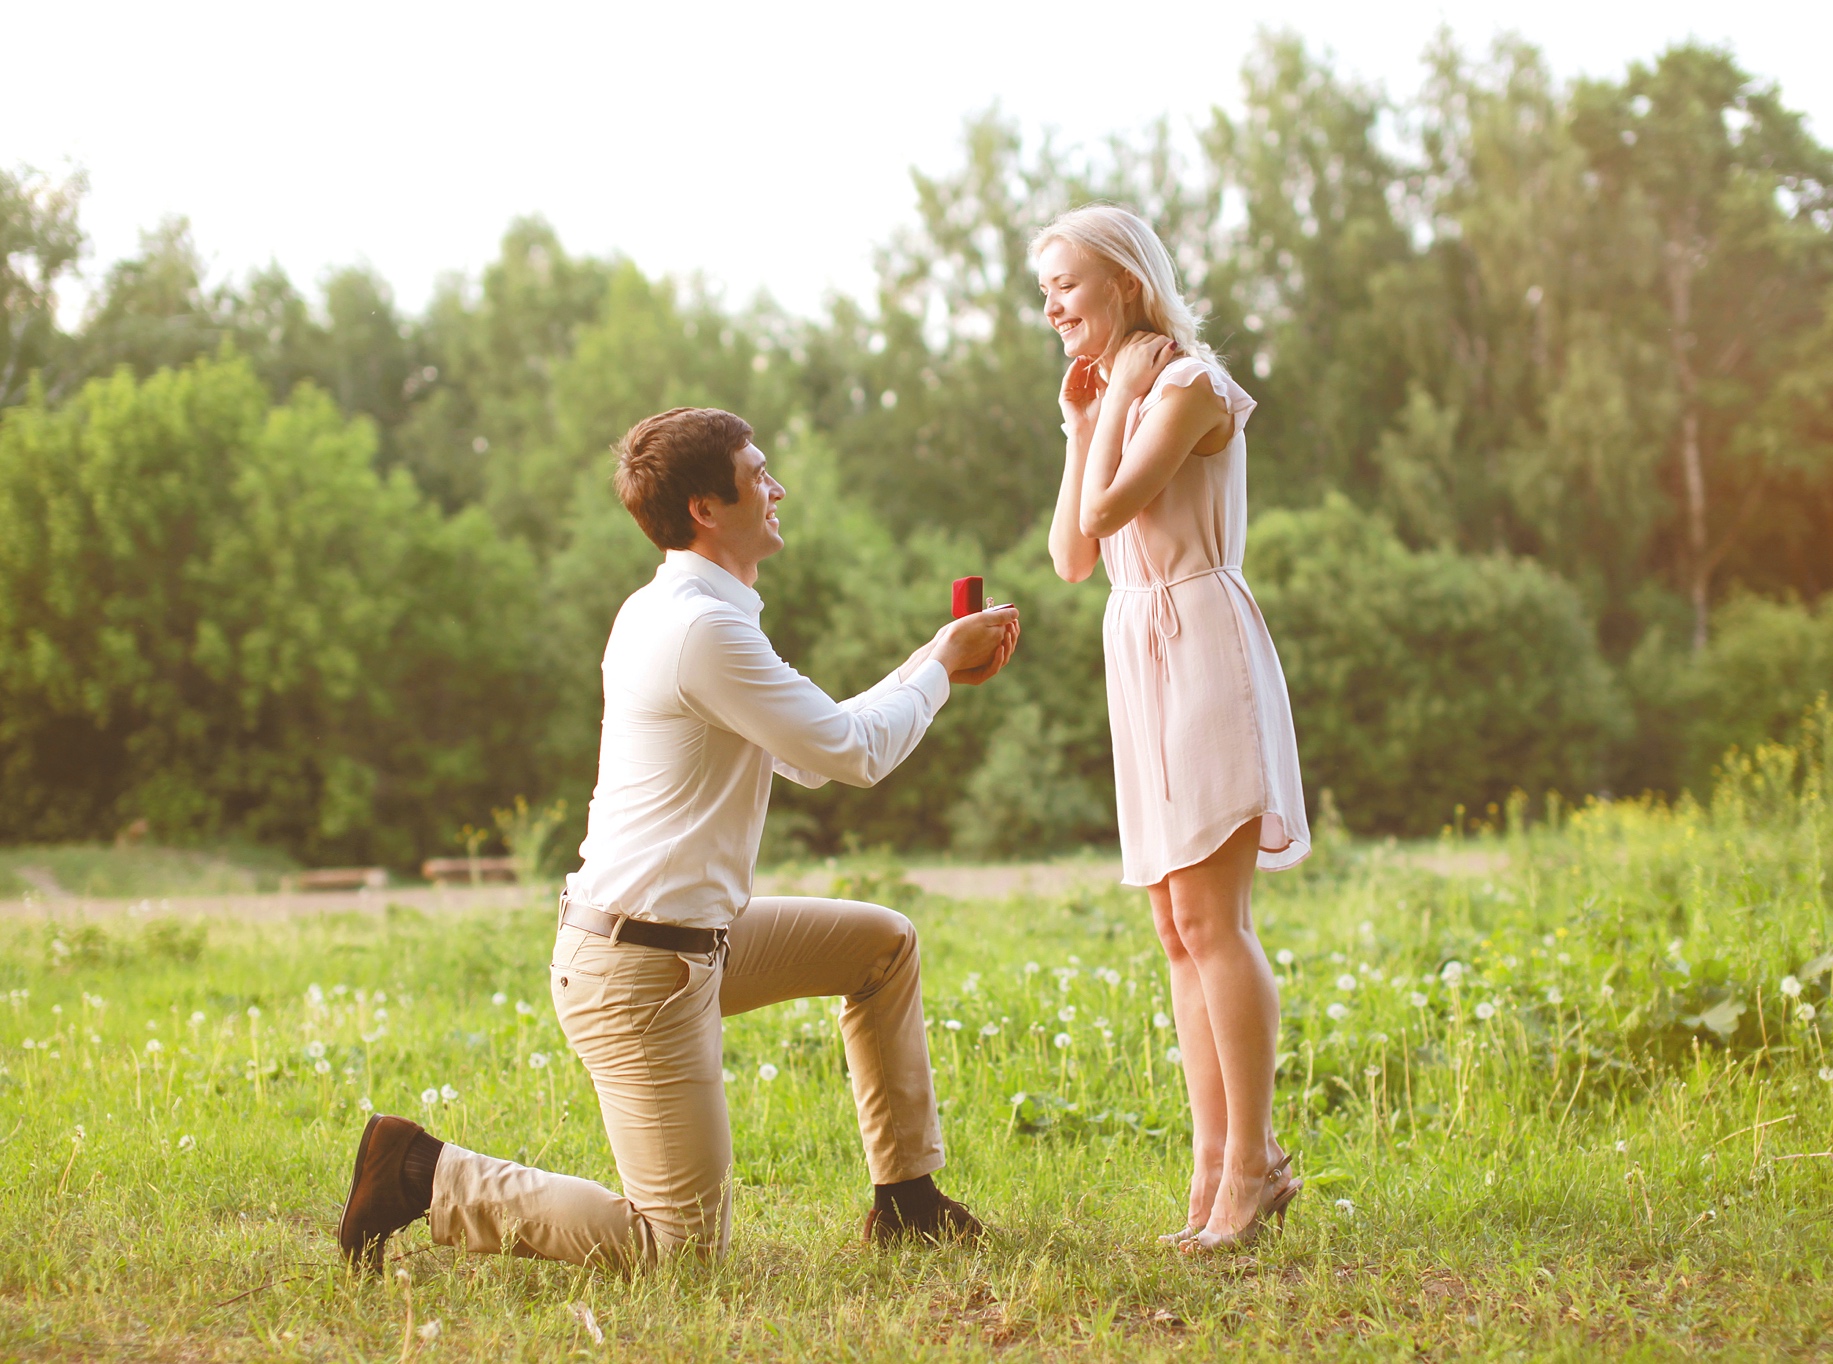 Do's and Don'ts of Proposing!